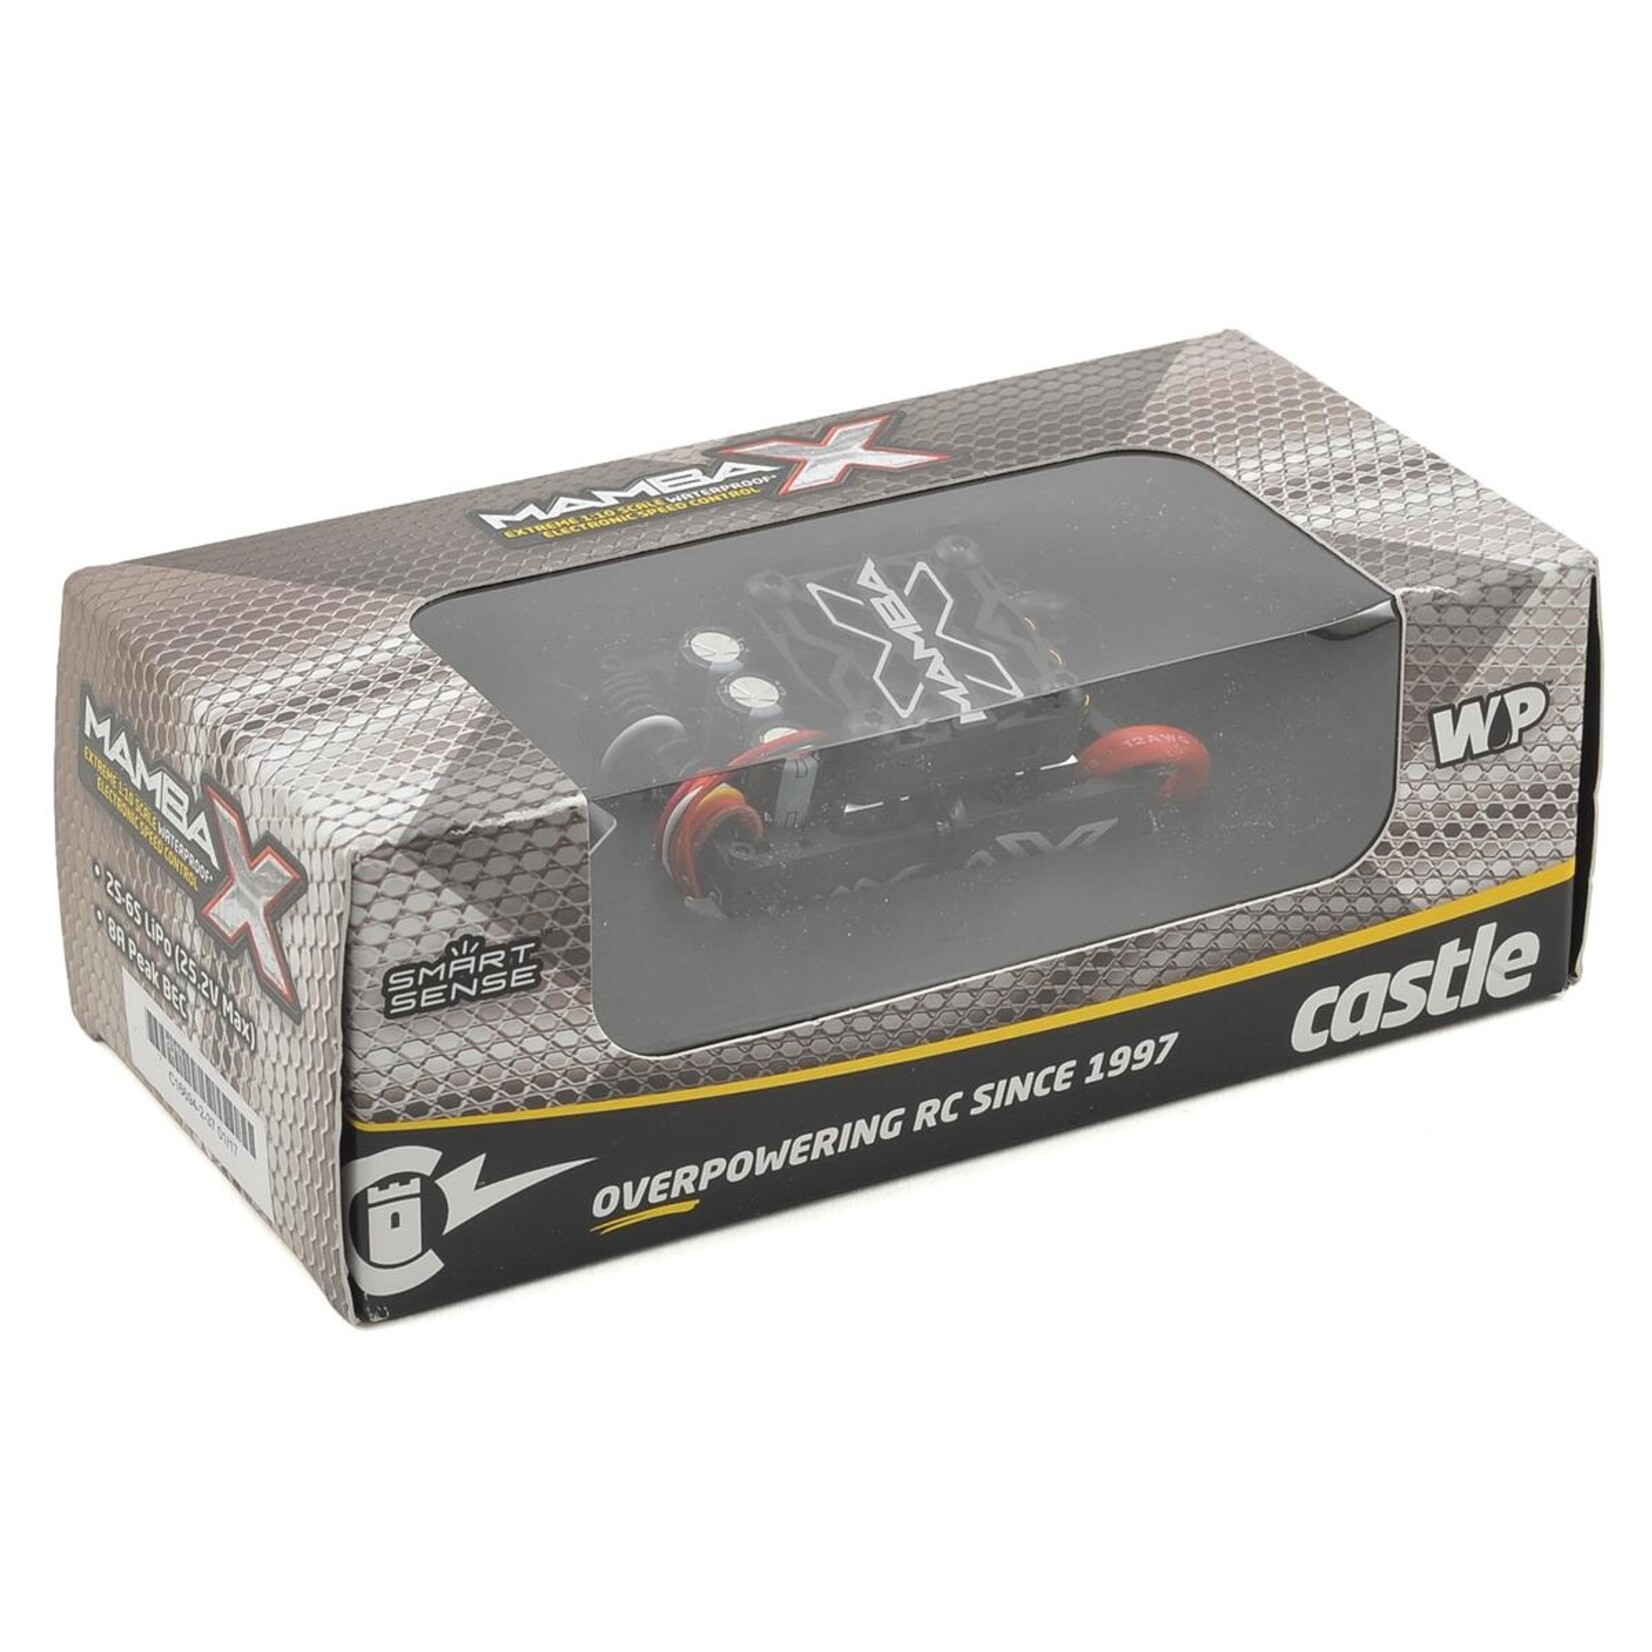 Castle Creations Castle Creations Mamba X Waterproof 1/10 Scale Brushless ESC #010-0155-00